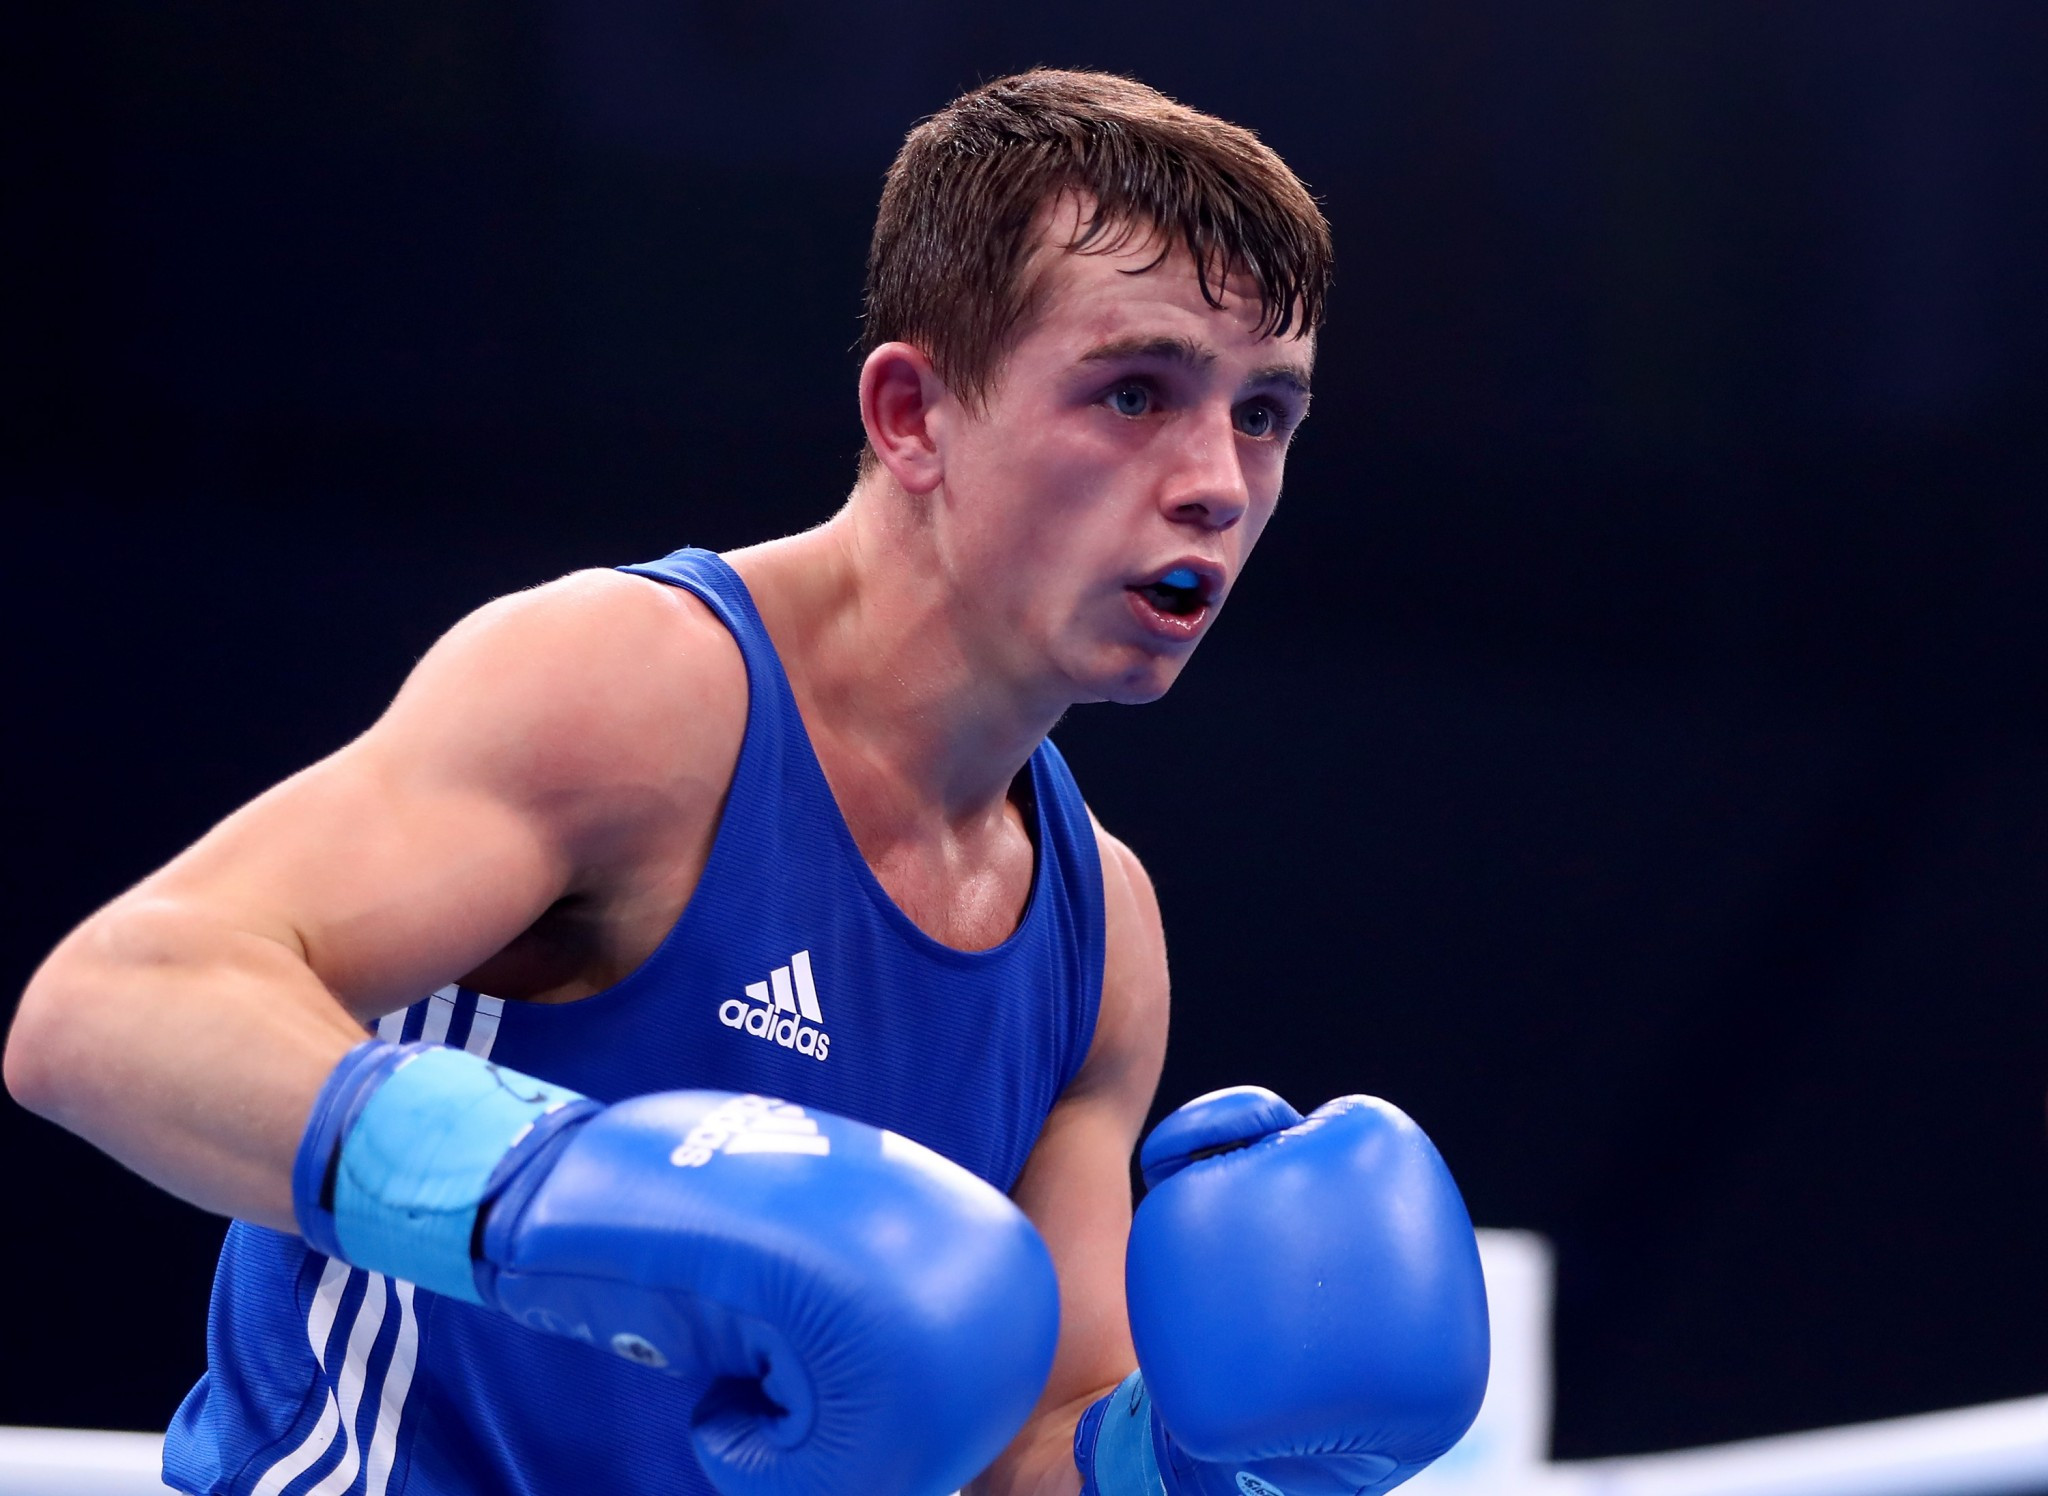 Peter McGrail was the only British medallist at the AIBA World Championships in Hamburg ©Getty Images